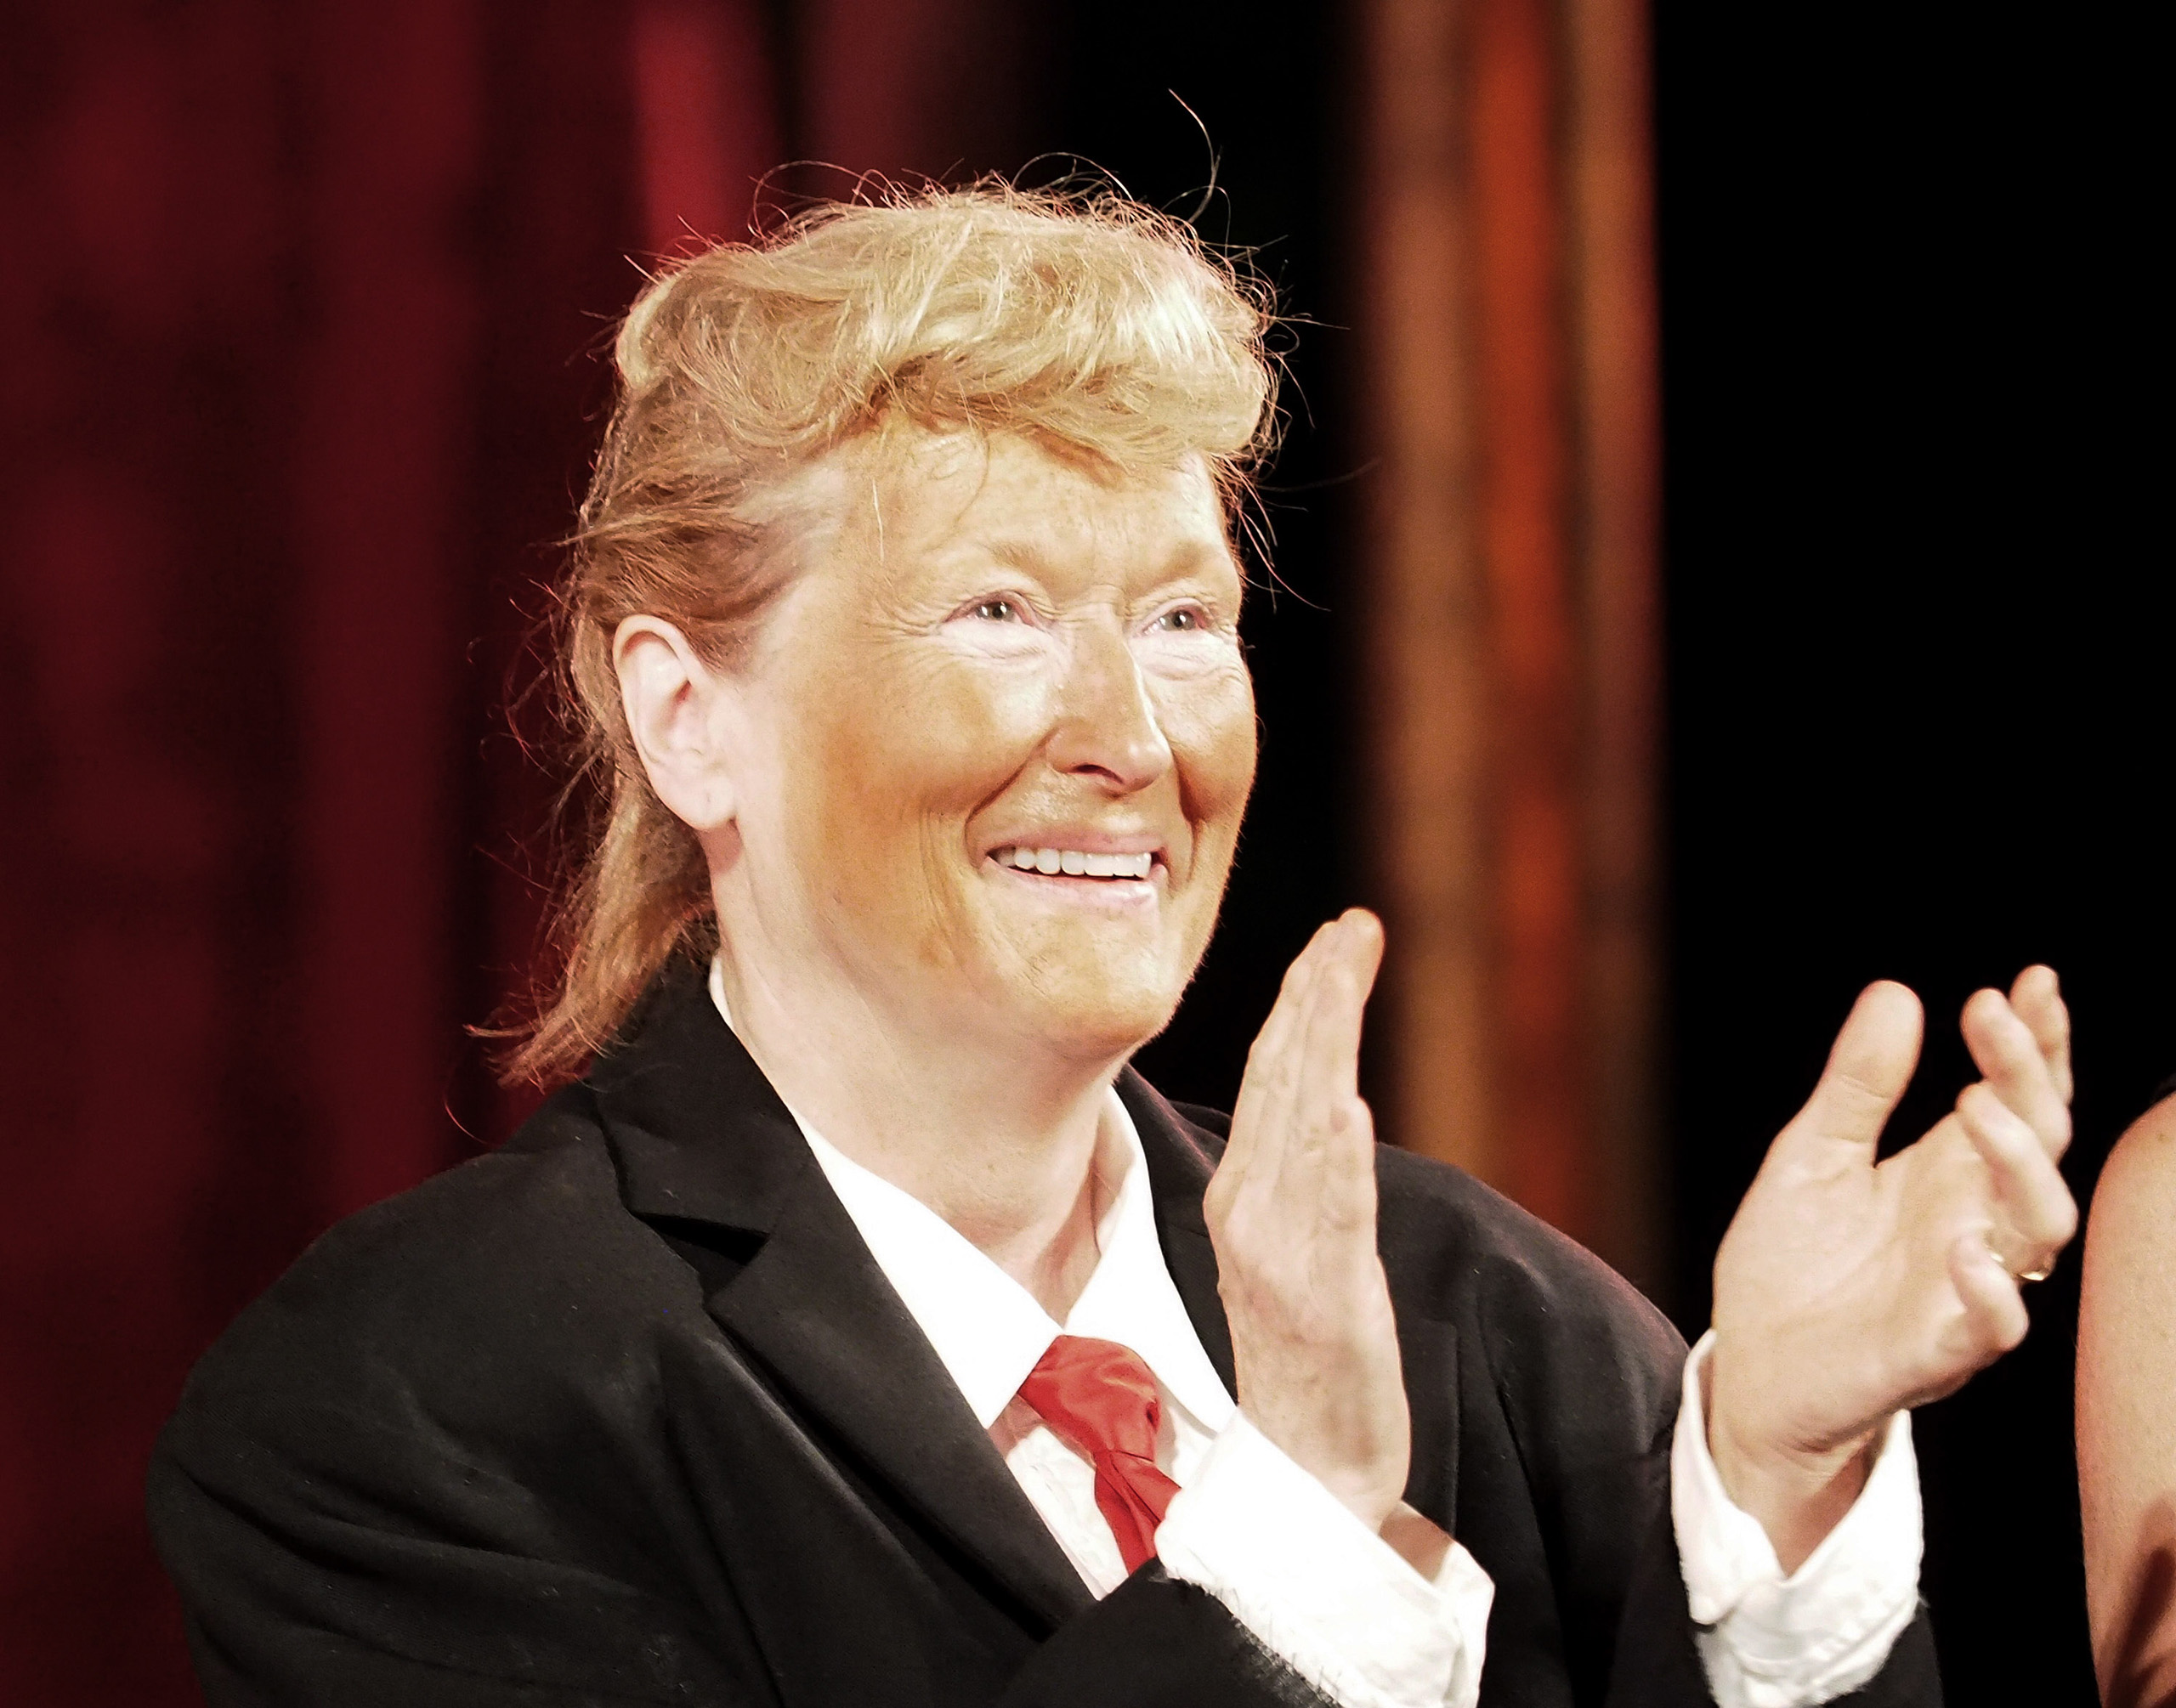 Meryl Streep, dressed as Donald Trump, performs onstage at the 2016 Public Theater Gala at Delacorte Theater in New York City on June 6, 2016. ((Paul Zimmerman—WireImage))